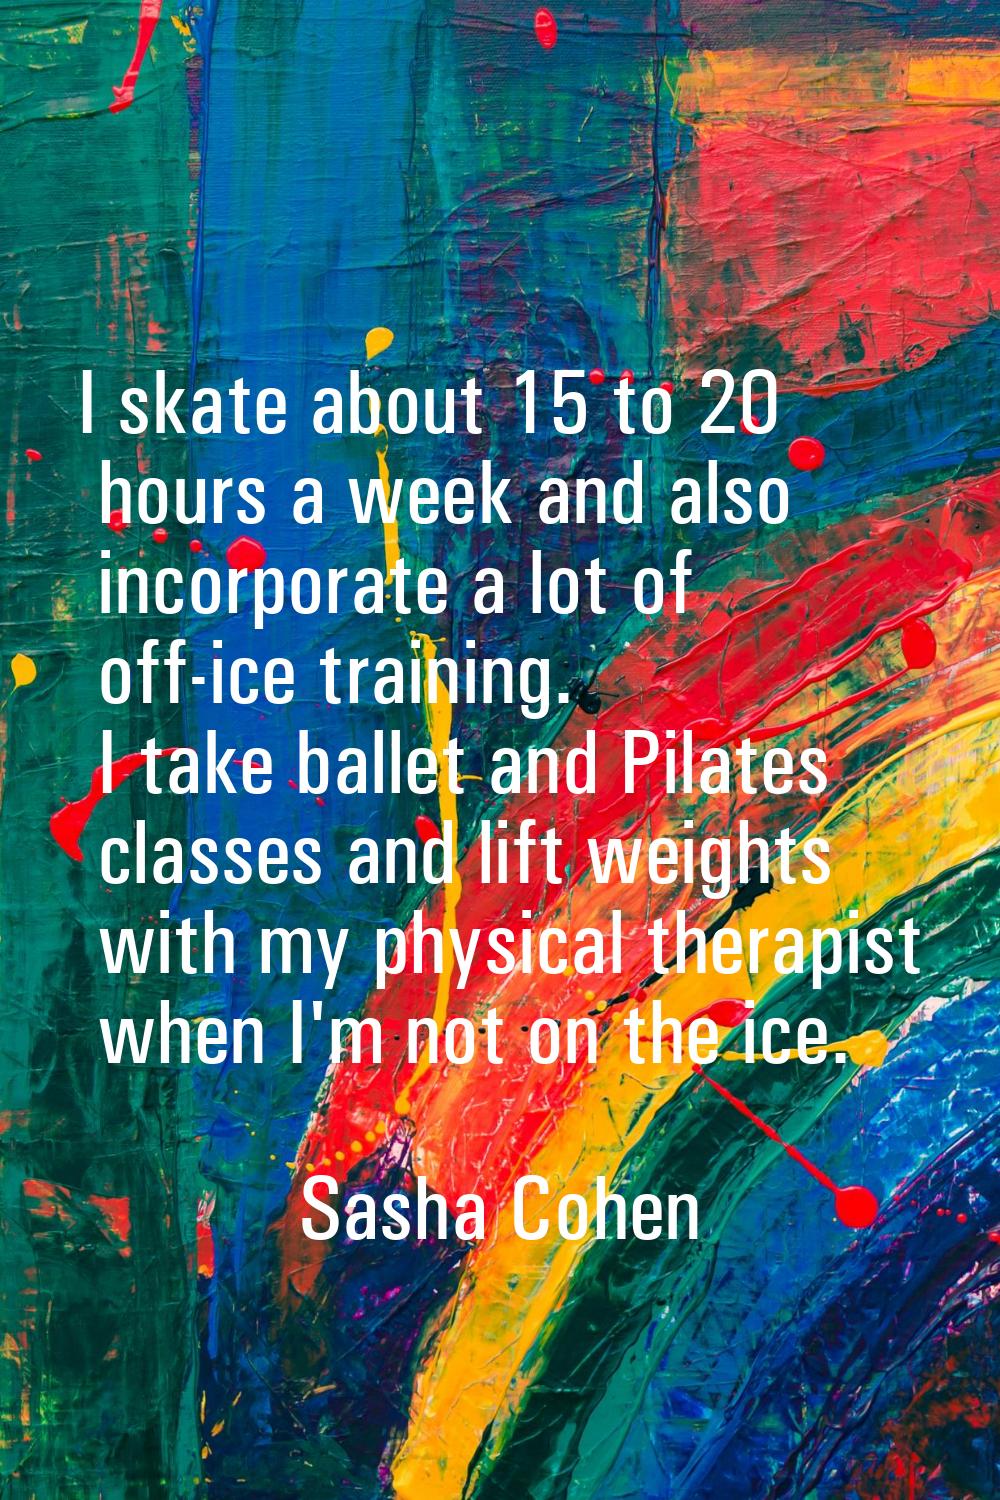 I skate about 15 to 20 hours a week and also incorporate a lot of off-ice training. I take ballet a